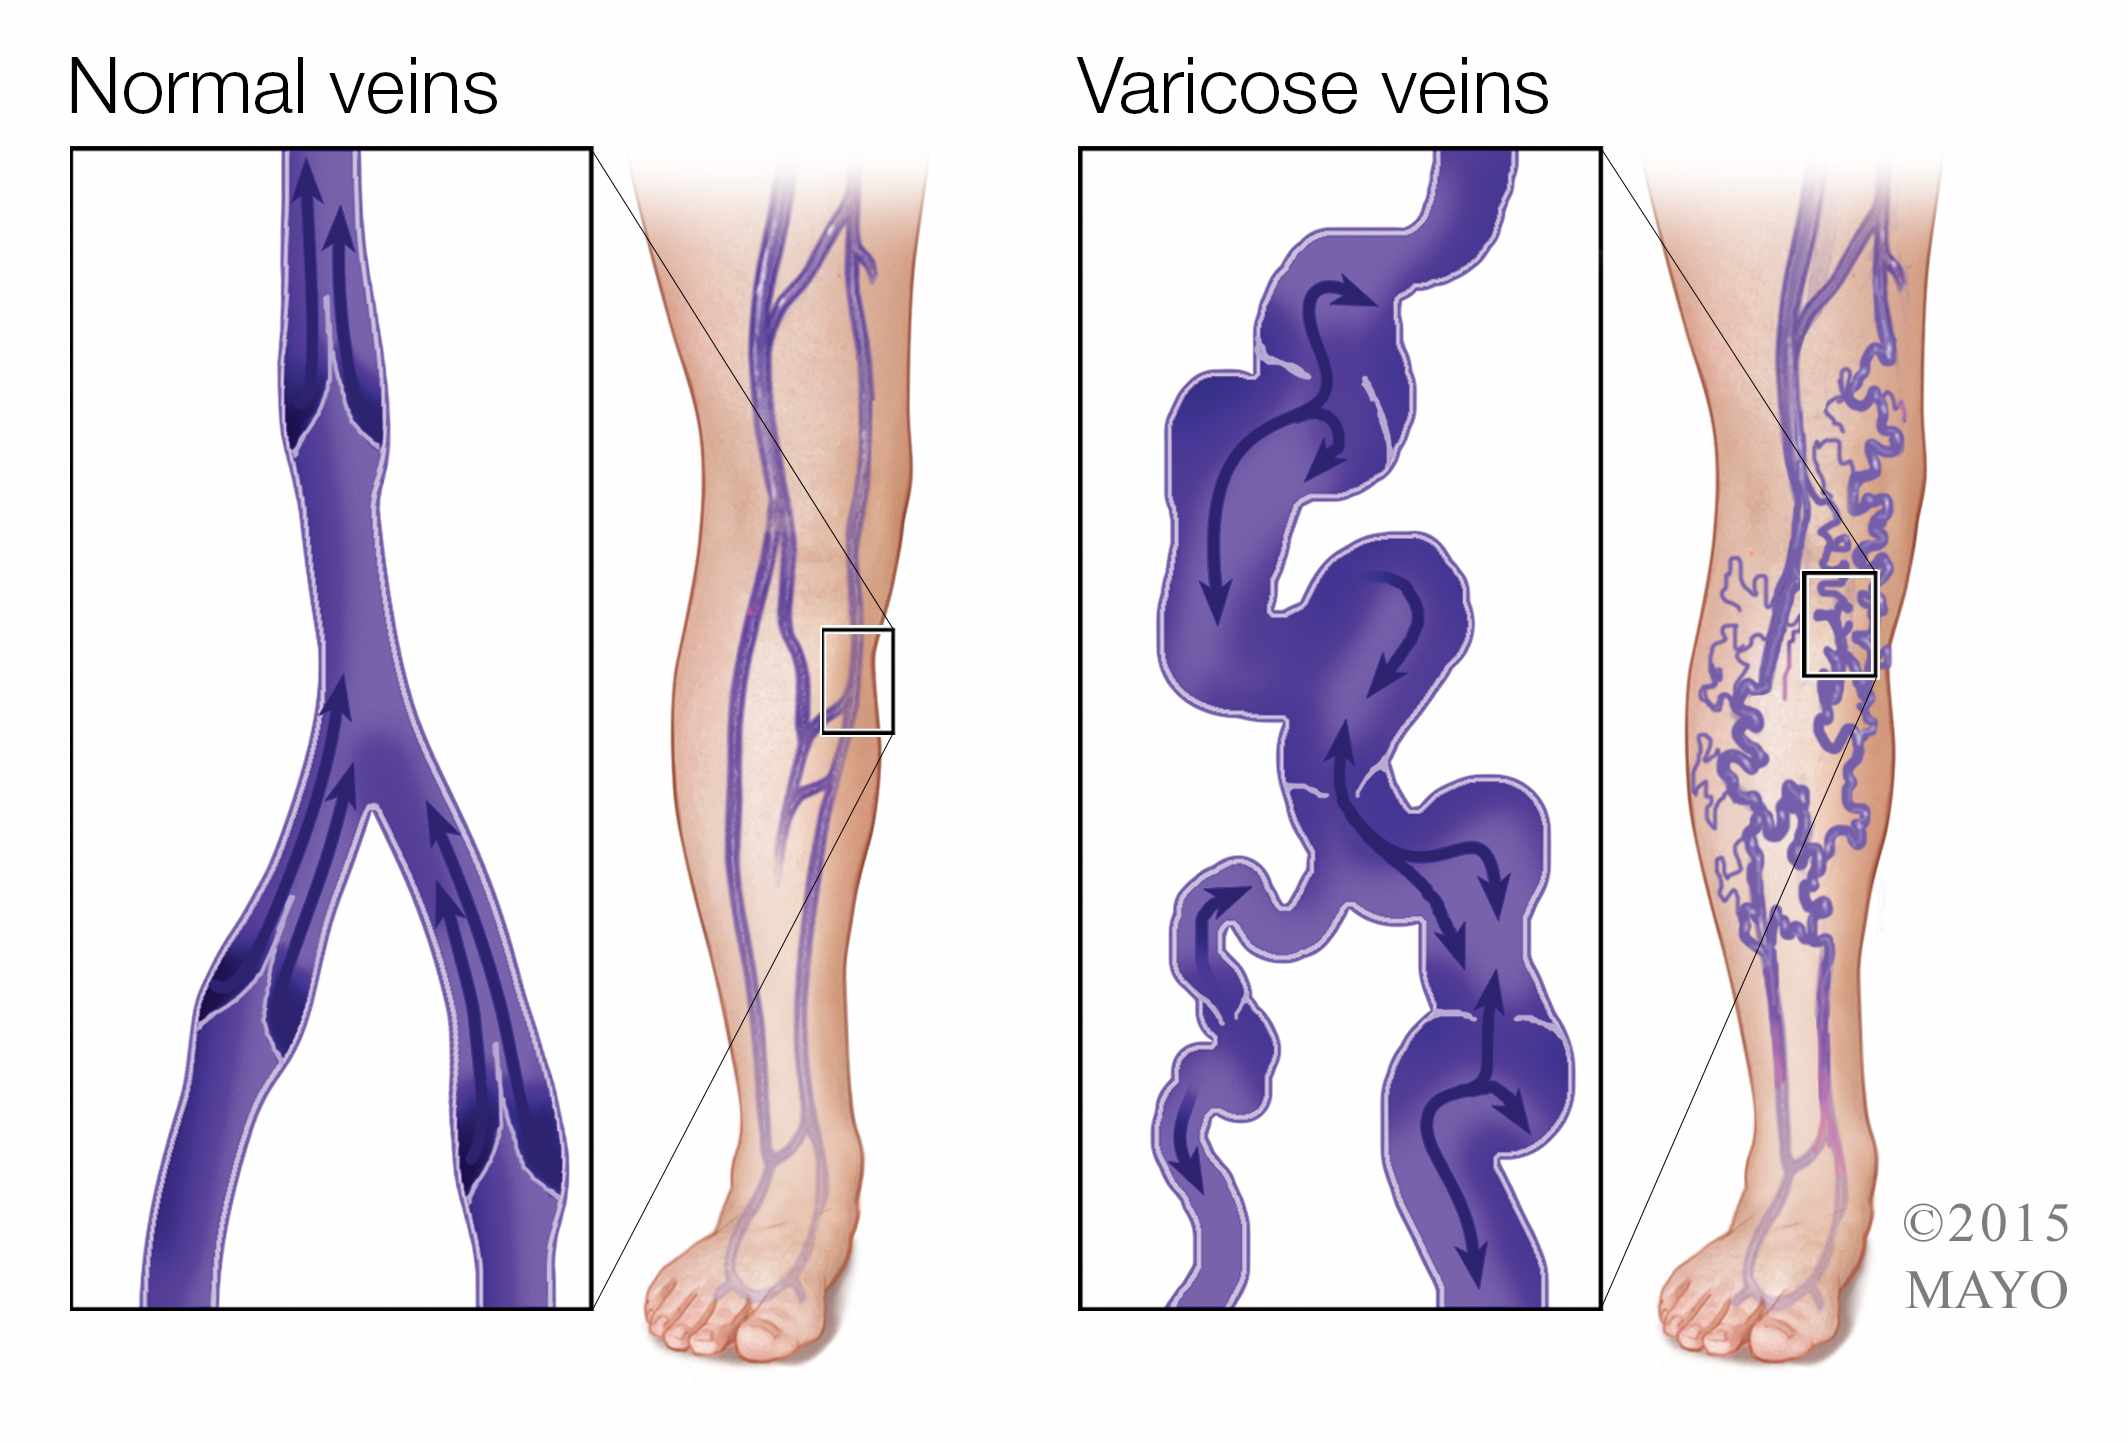 What are the best varicose vein treatment options?